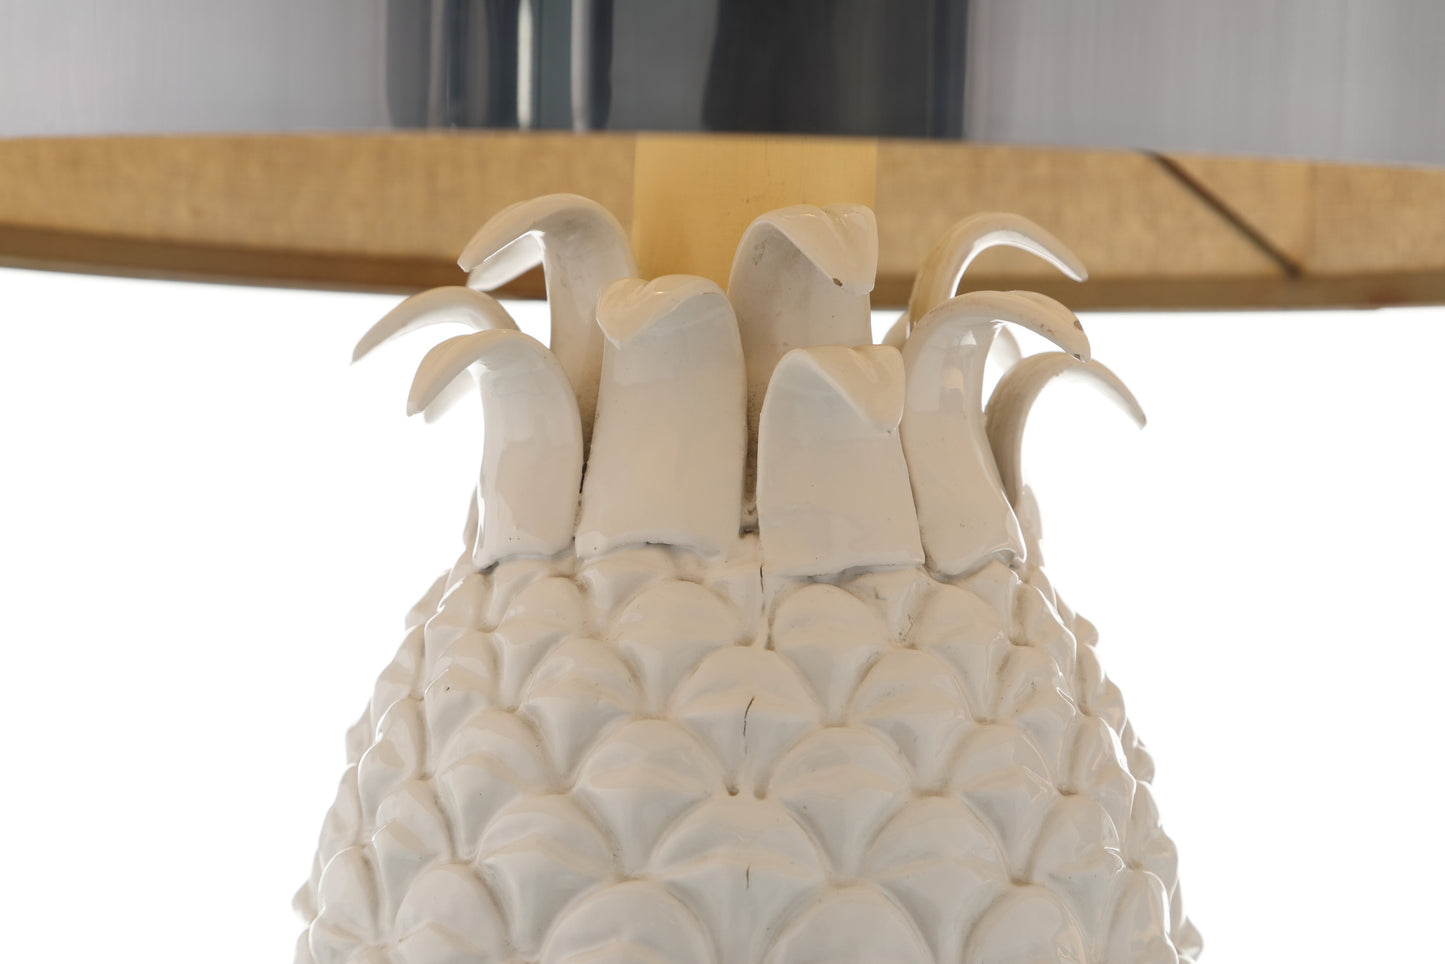 Ceramic lamp from the 60s Pineapple